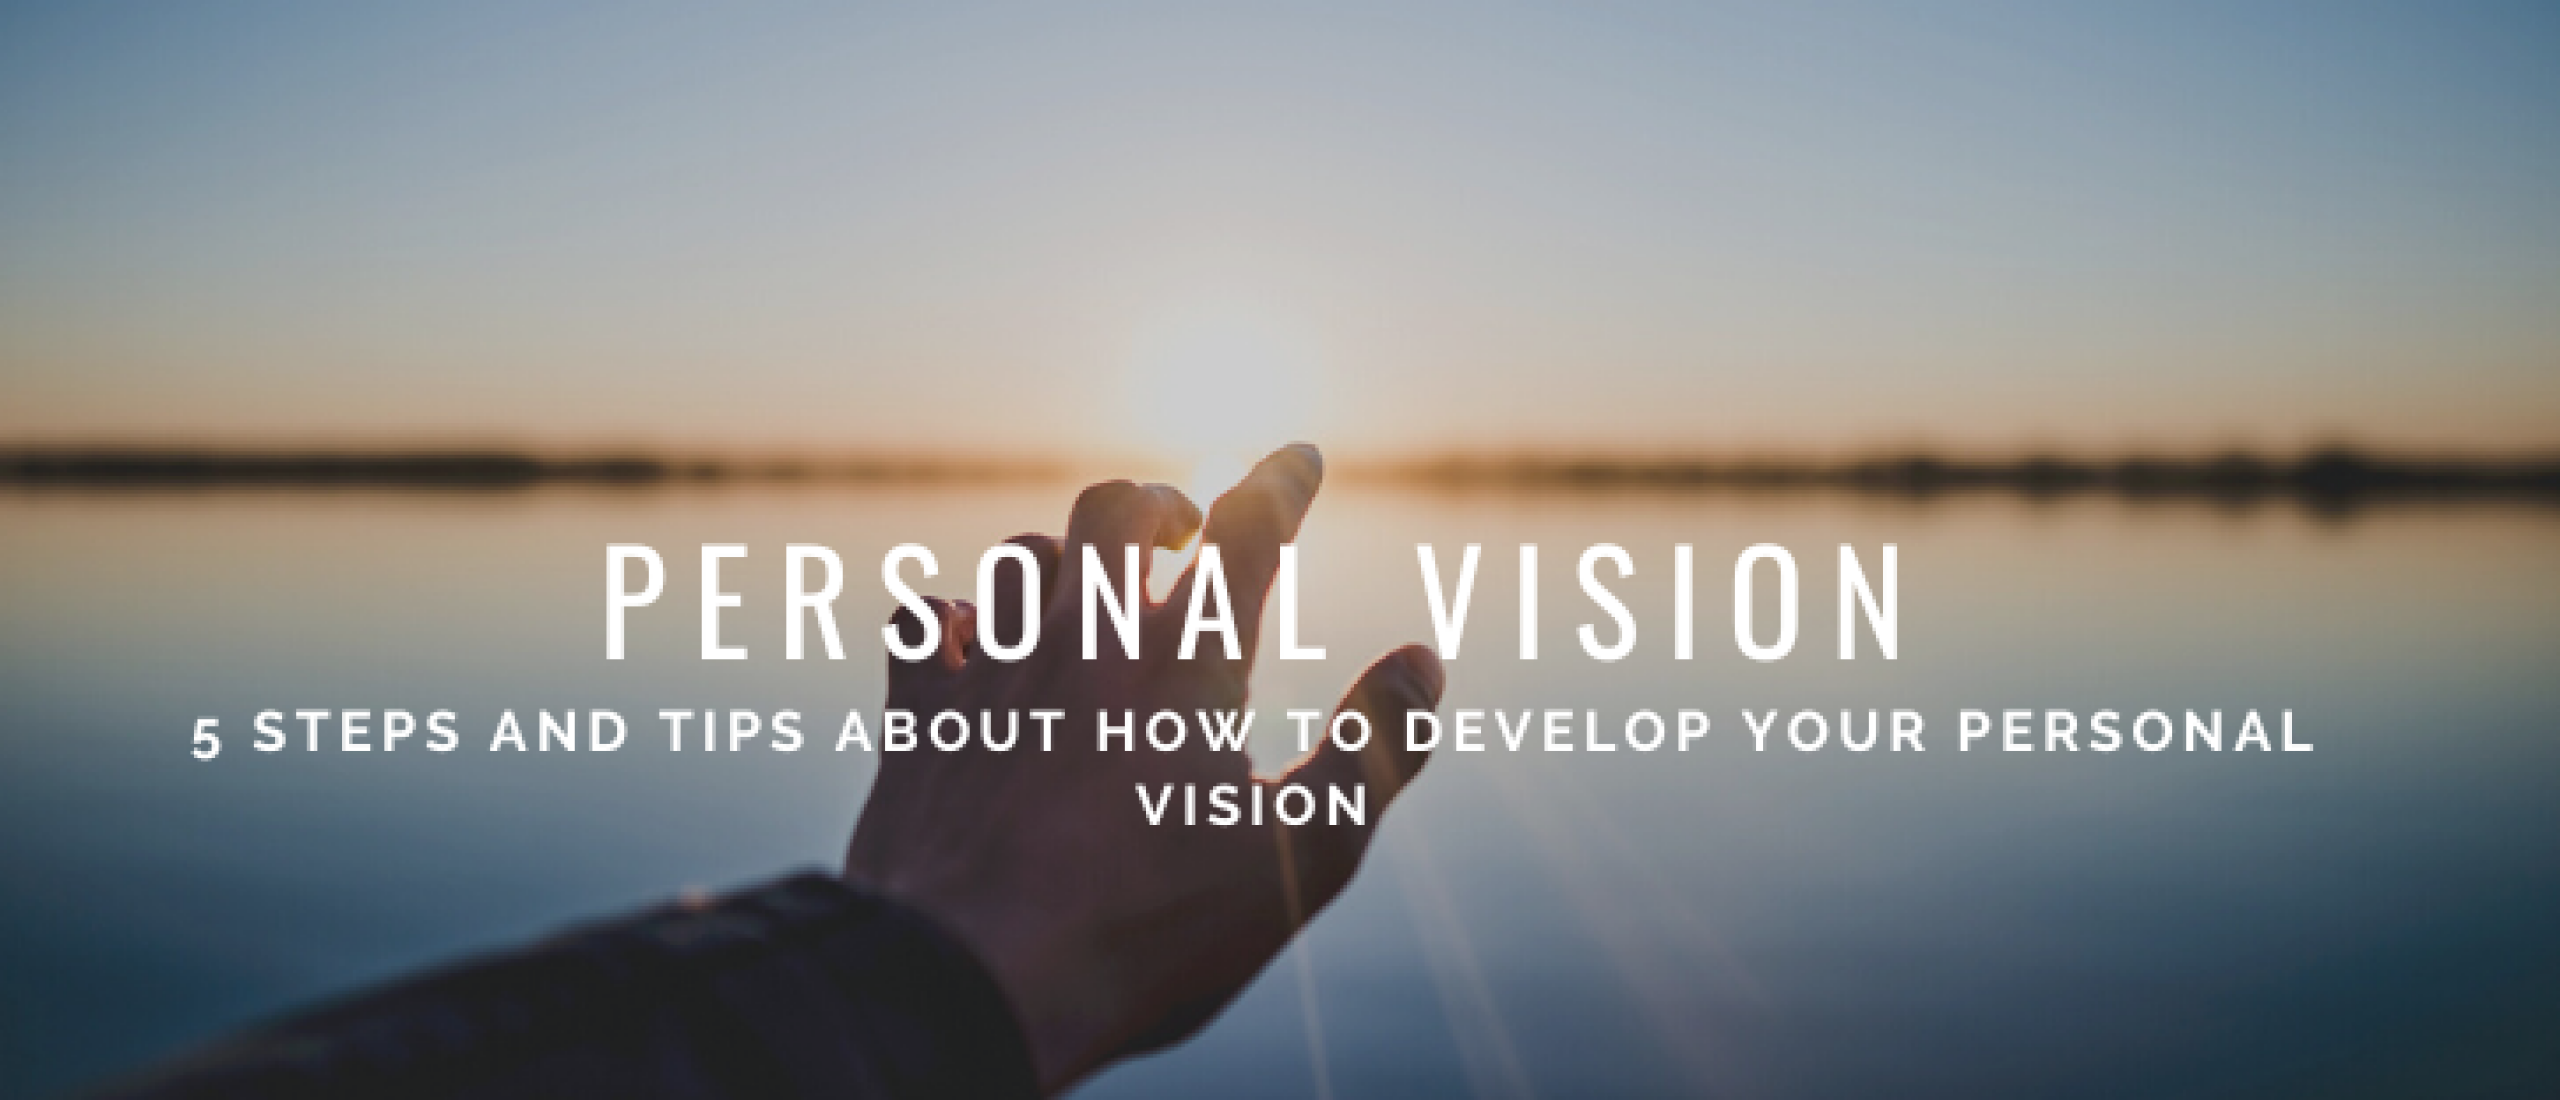 Develop Your Personal Vision: 5 Steps and Tips